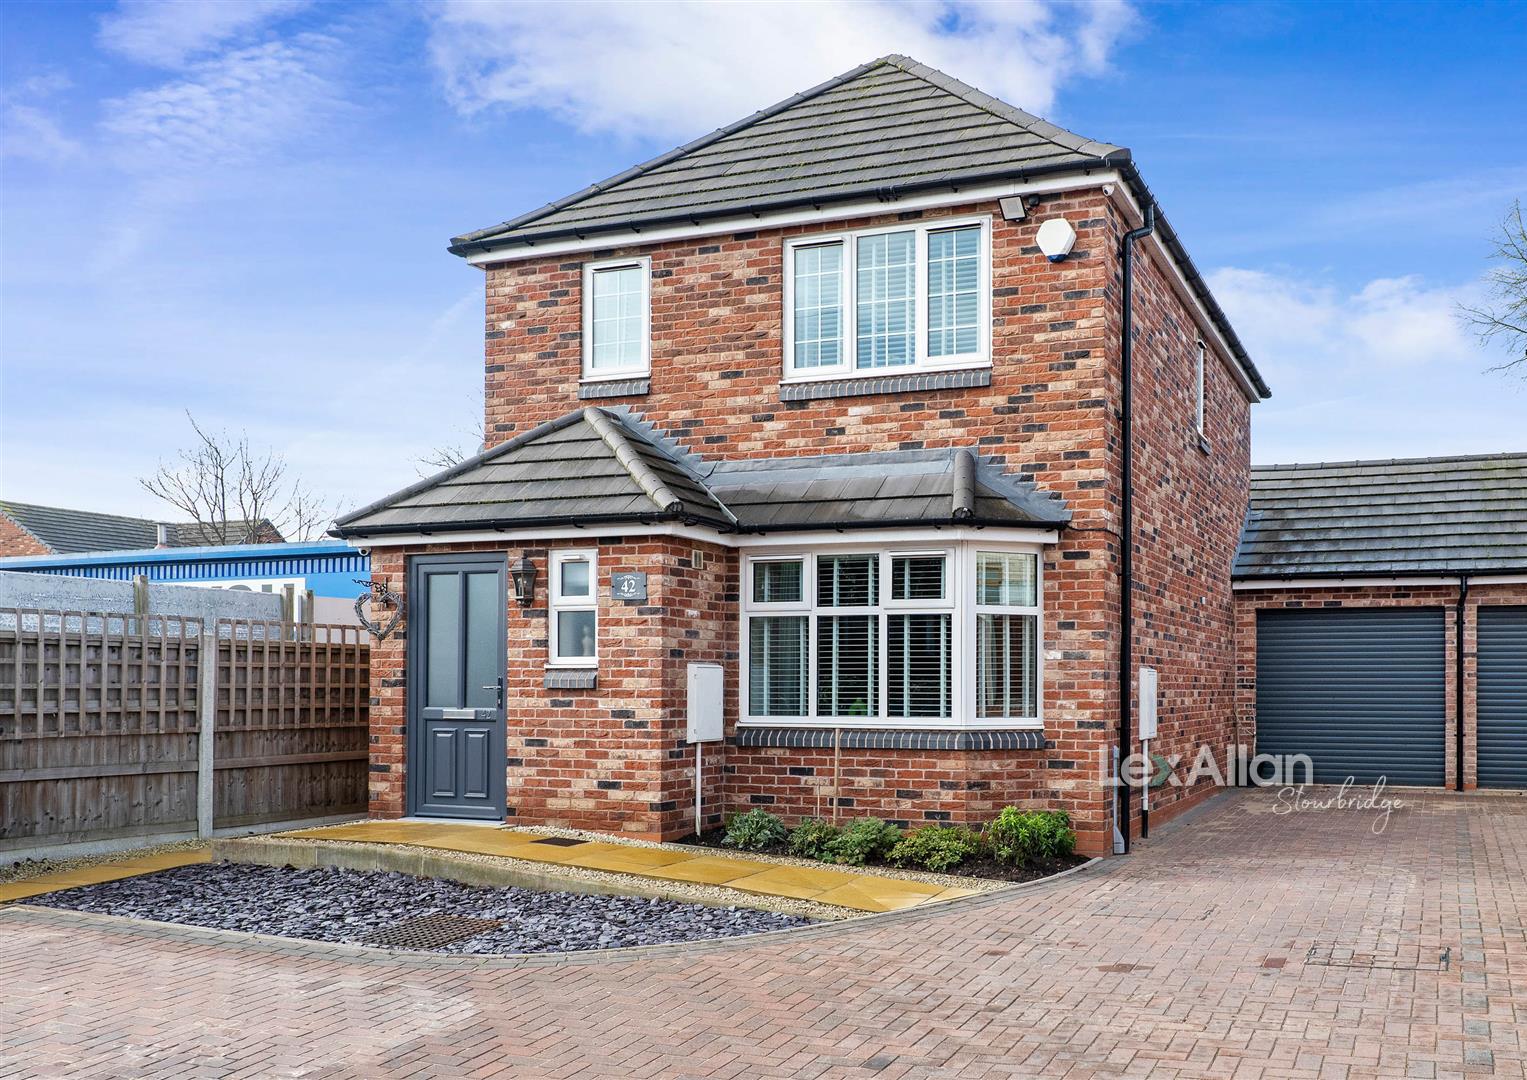 3 bed detached house for sale in Camphill, Stourbridge - Property Image 1